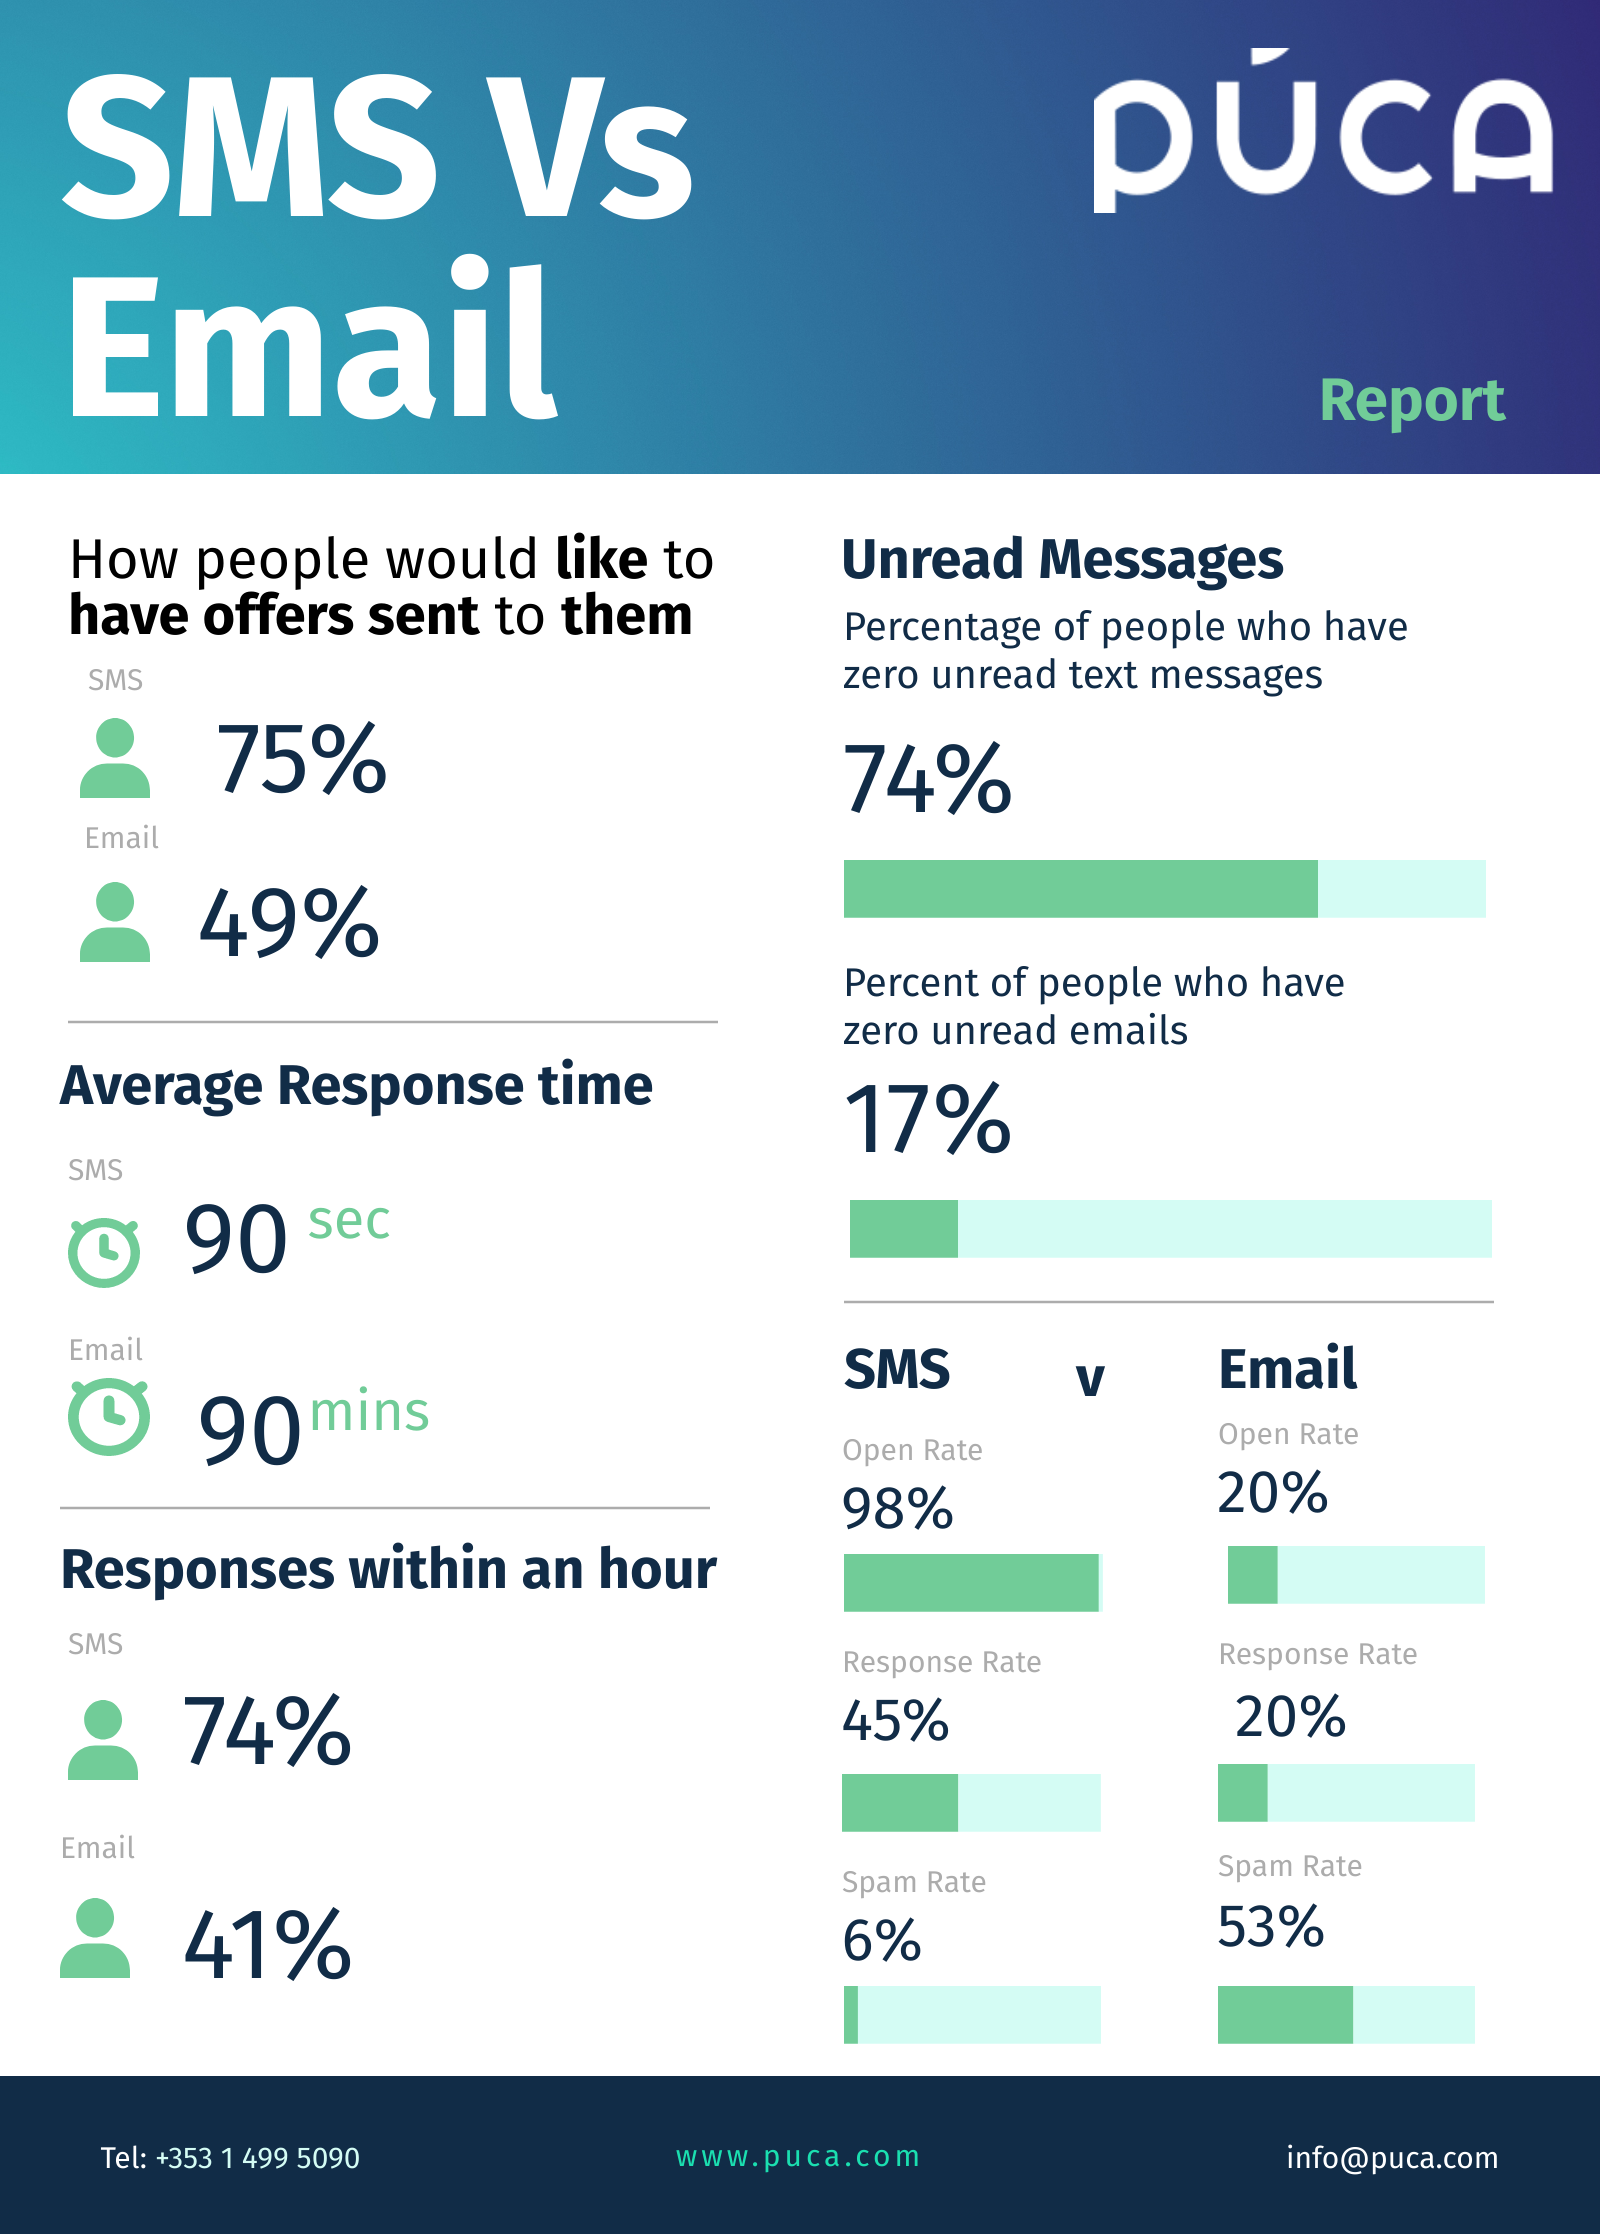 SMS Vs Email